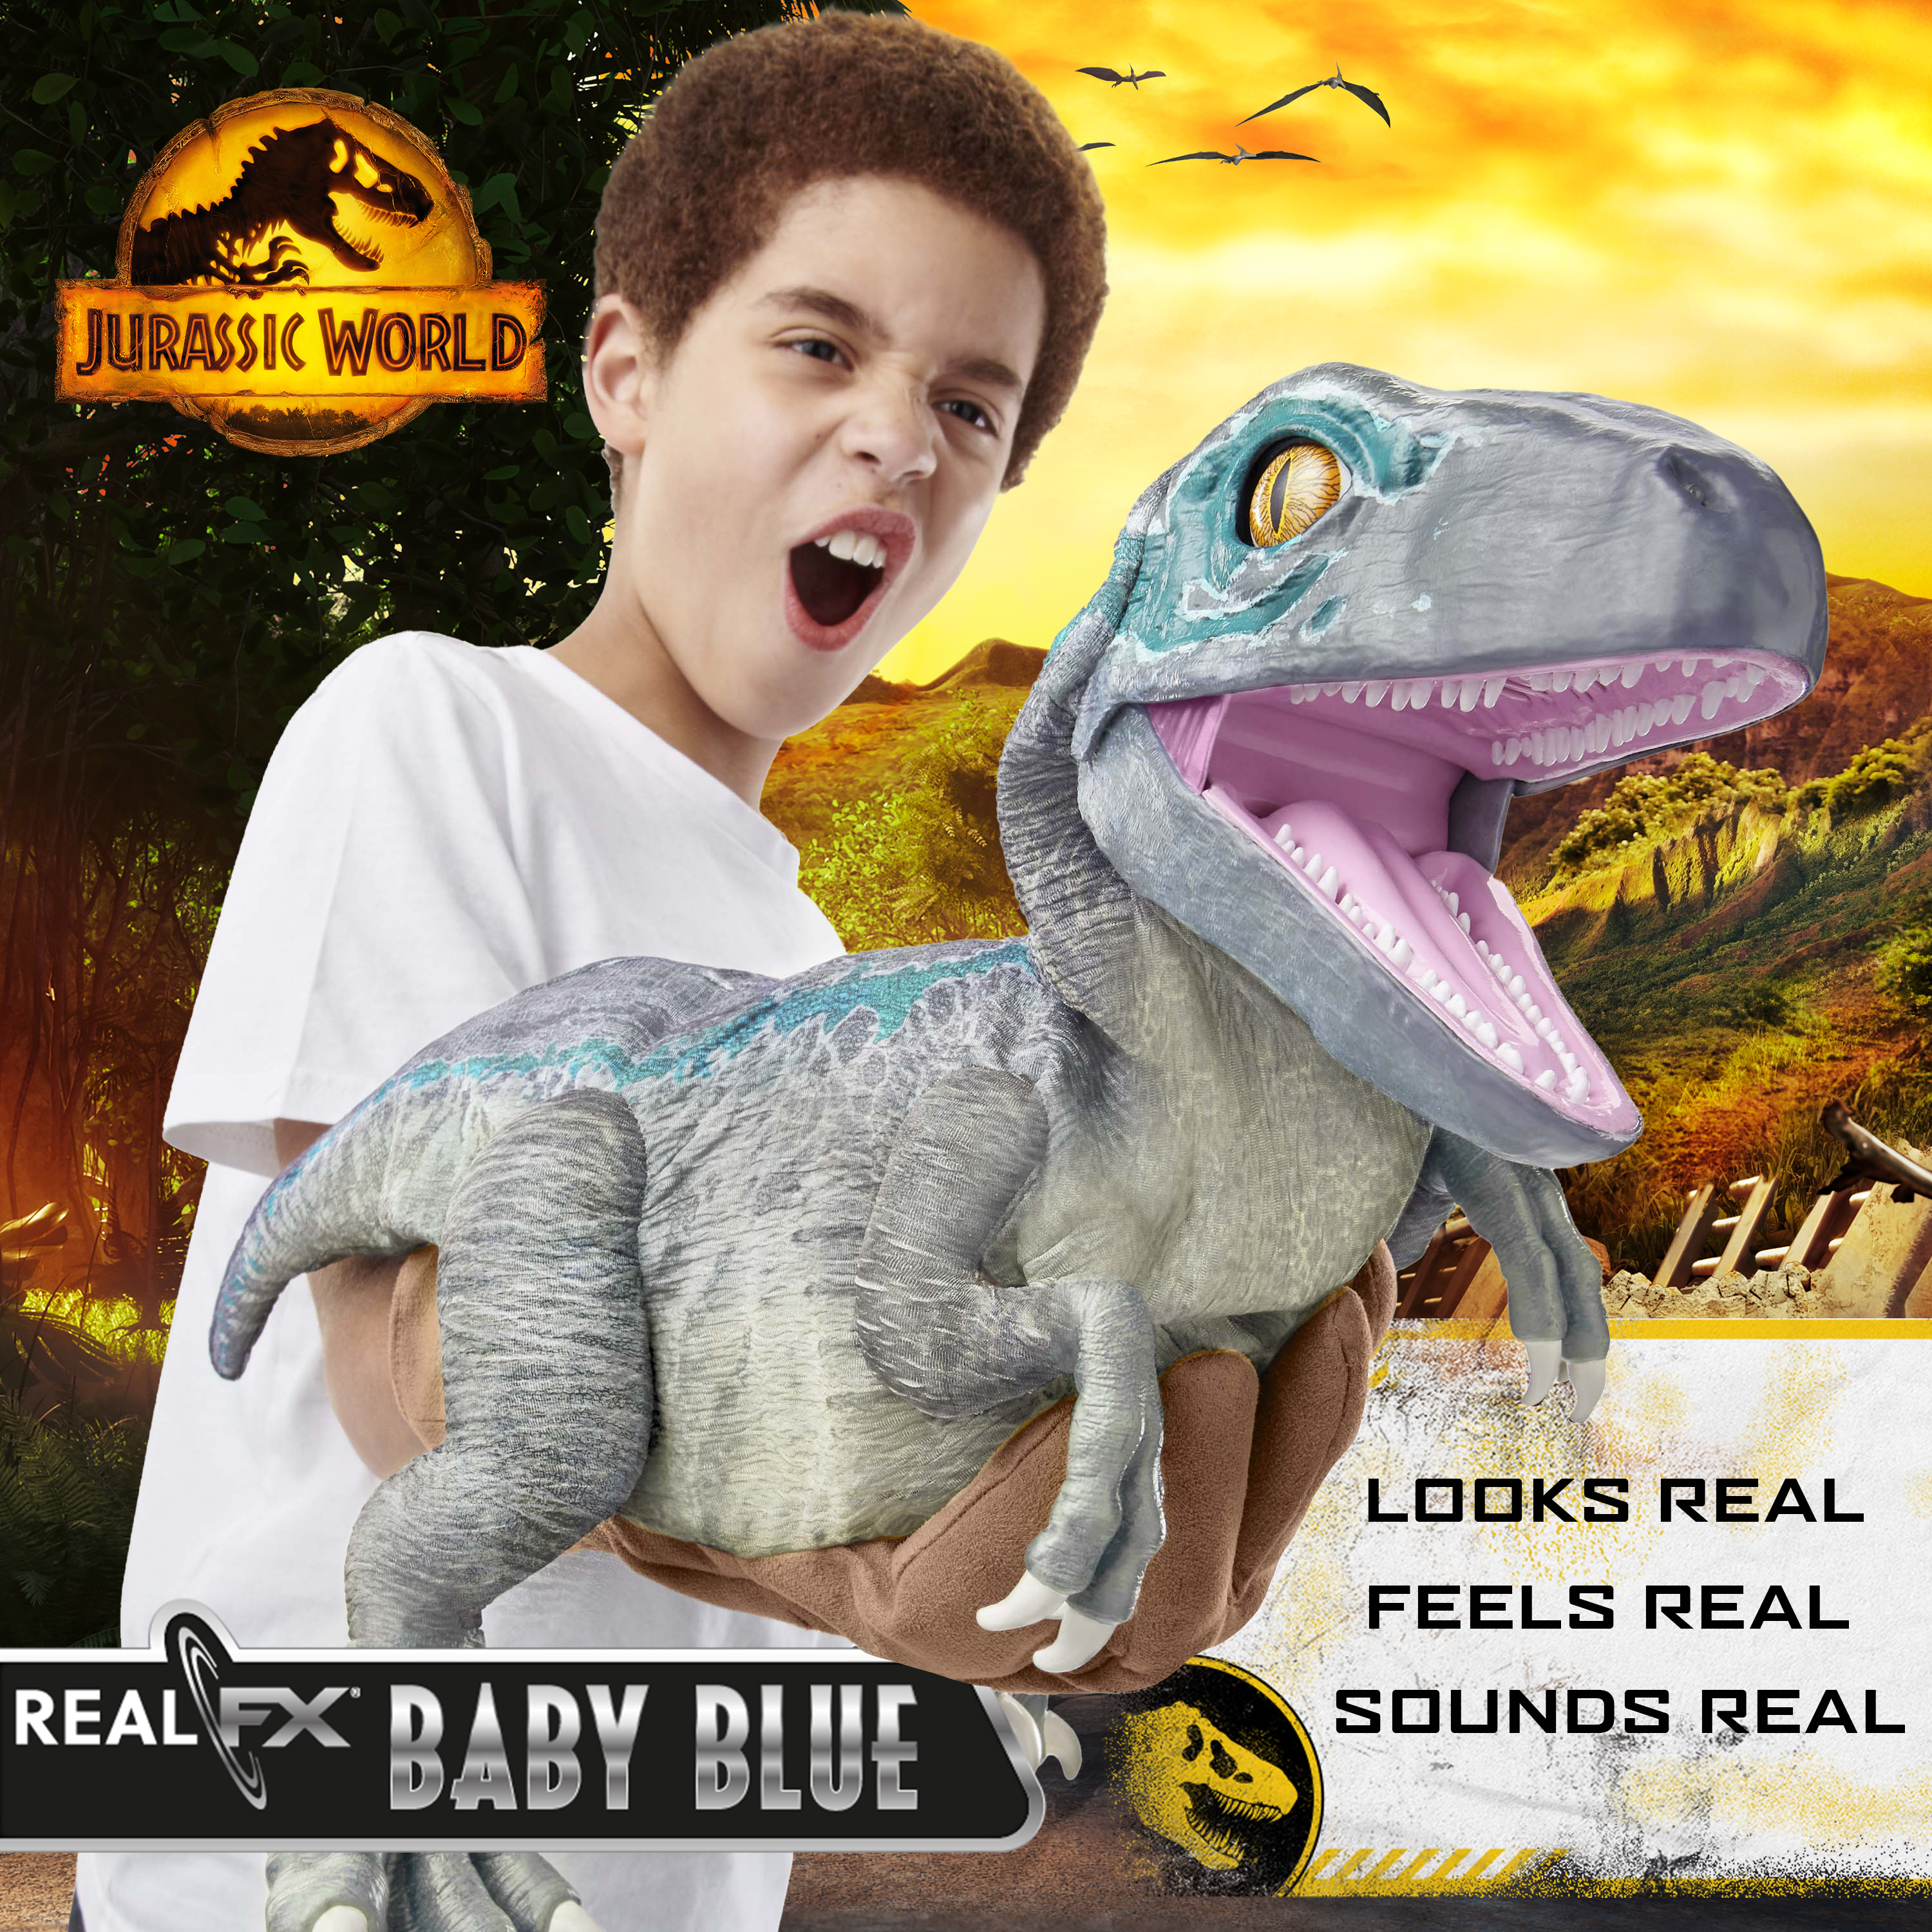 Jurassic World REALFX Baby Blue | Hyper-Realistic Dinosaur Animatronic Puppet Toy | Life-like Movements and Real Movie Sounds | Jurassic World Dominion Official Gifts, Collectables and Toys - image 6 of 13